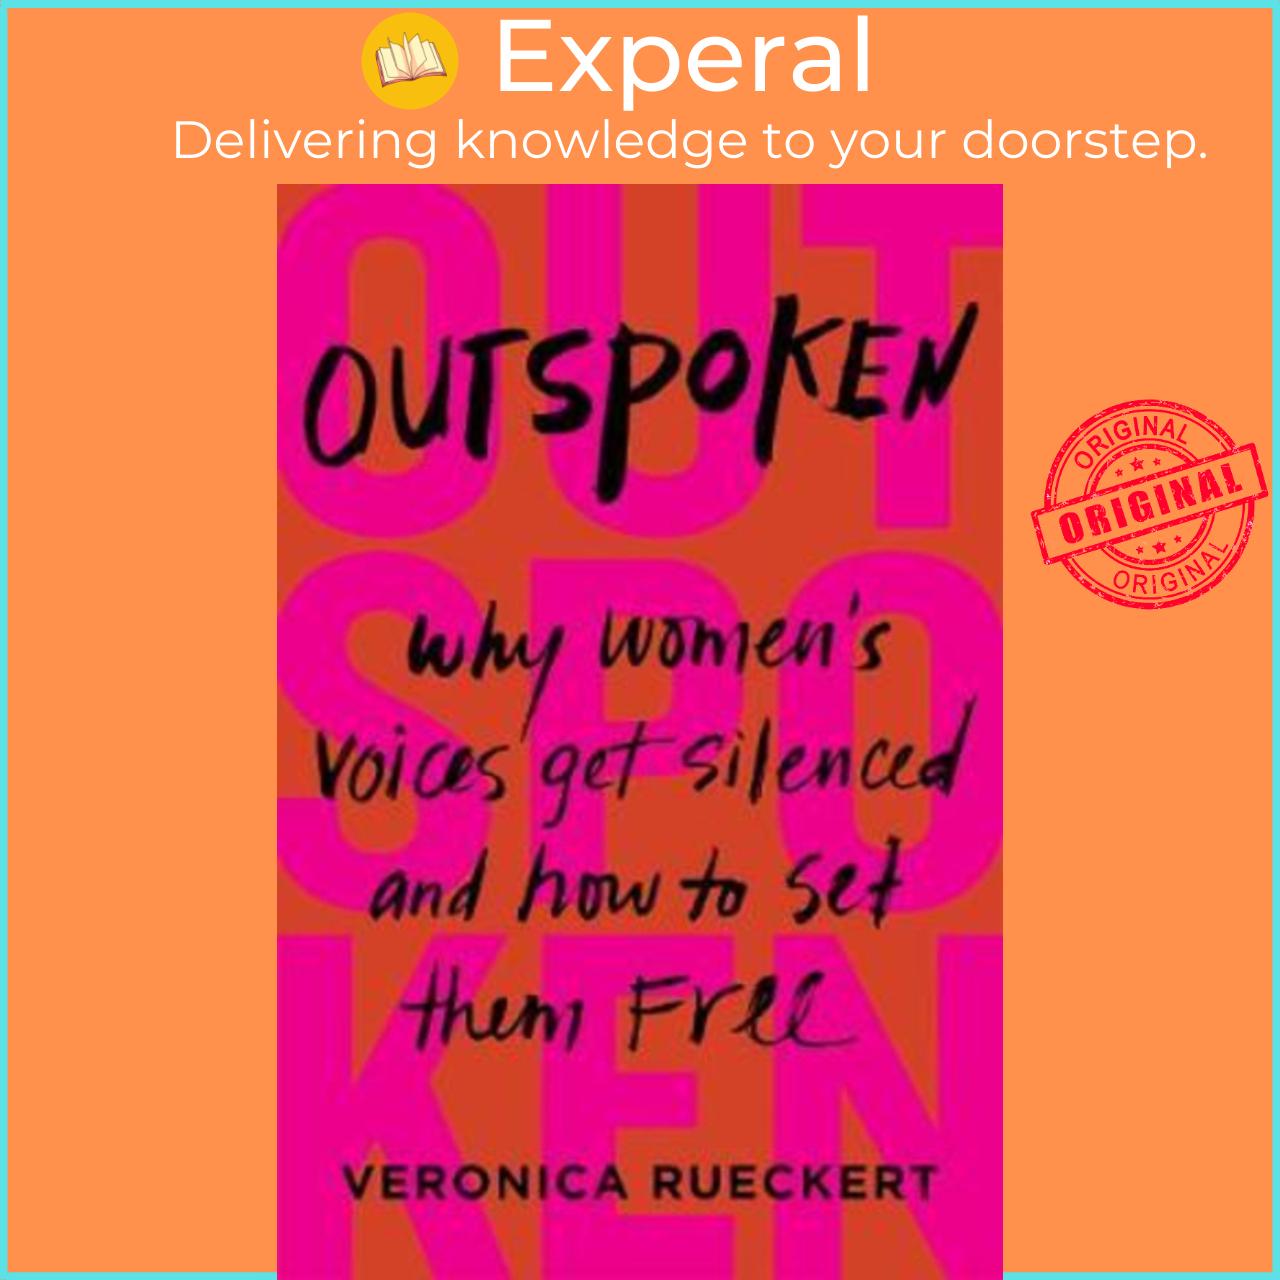 Hình ảnh Sách - Outspoken : Why Women's Voices Get Silenced and How to Set Them Free by Veronica Rueckert (US edition, paperback)